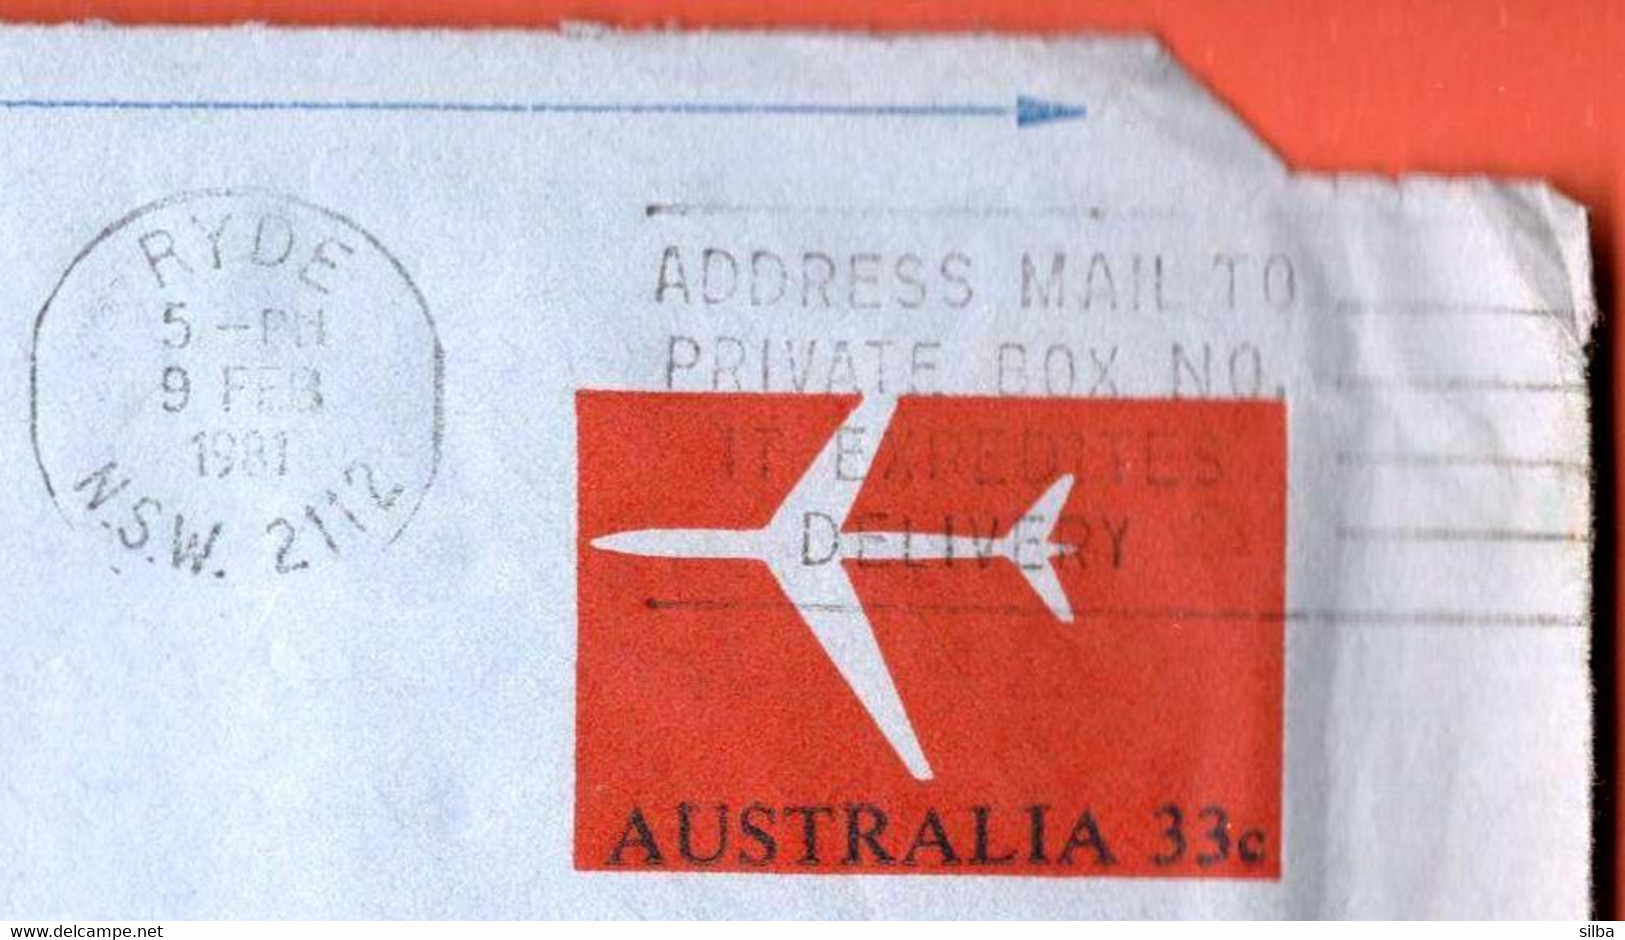 Australia Ryde 1981 / Address Mail To Private Box No. It Expedites Delivery Machine Stamp / Aerogramme - Aérogrammes